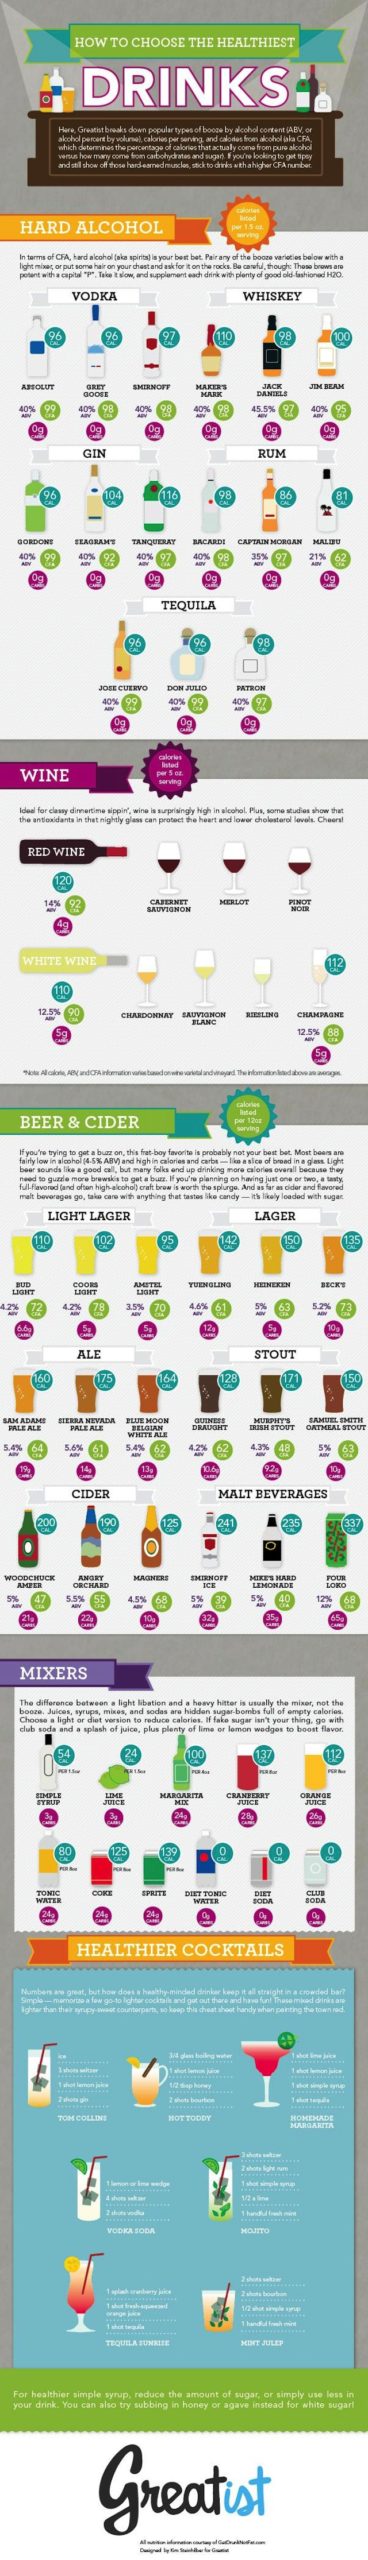 This Graphic Guides You To The Healthiest Beer, Wine And Cocktails